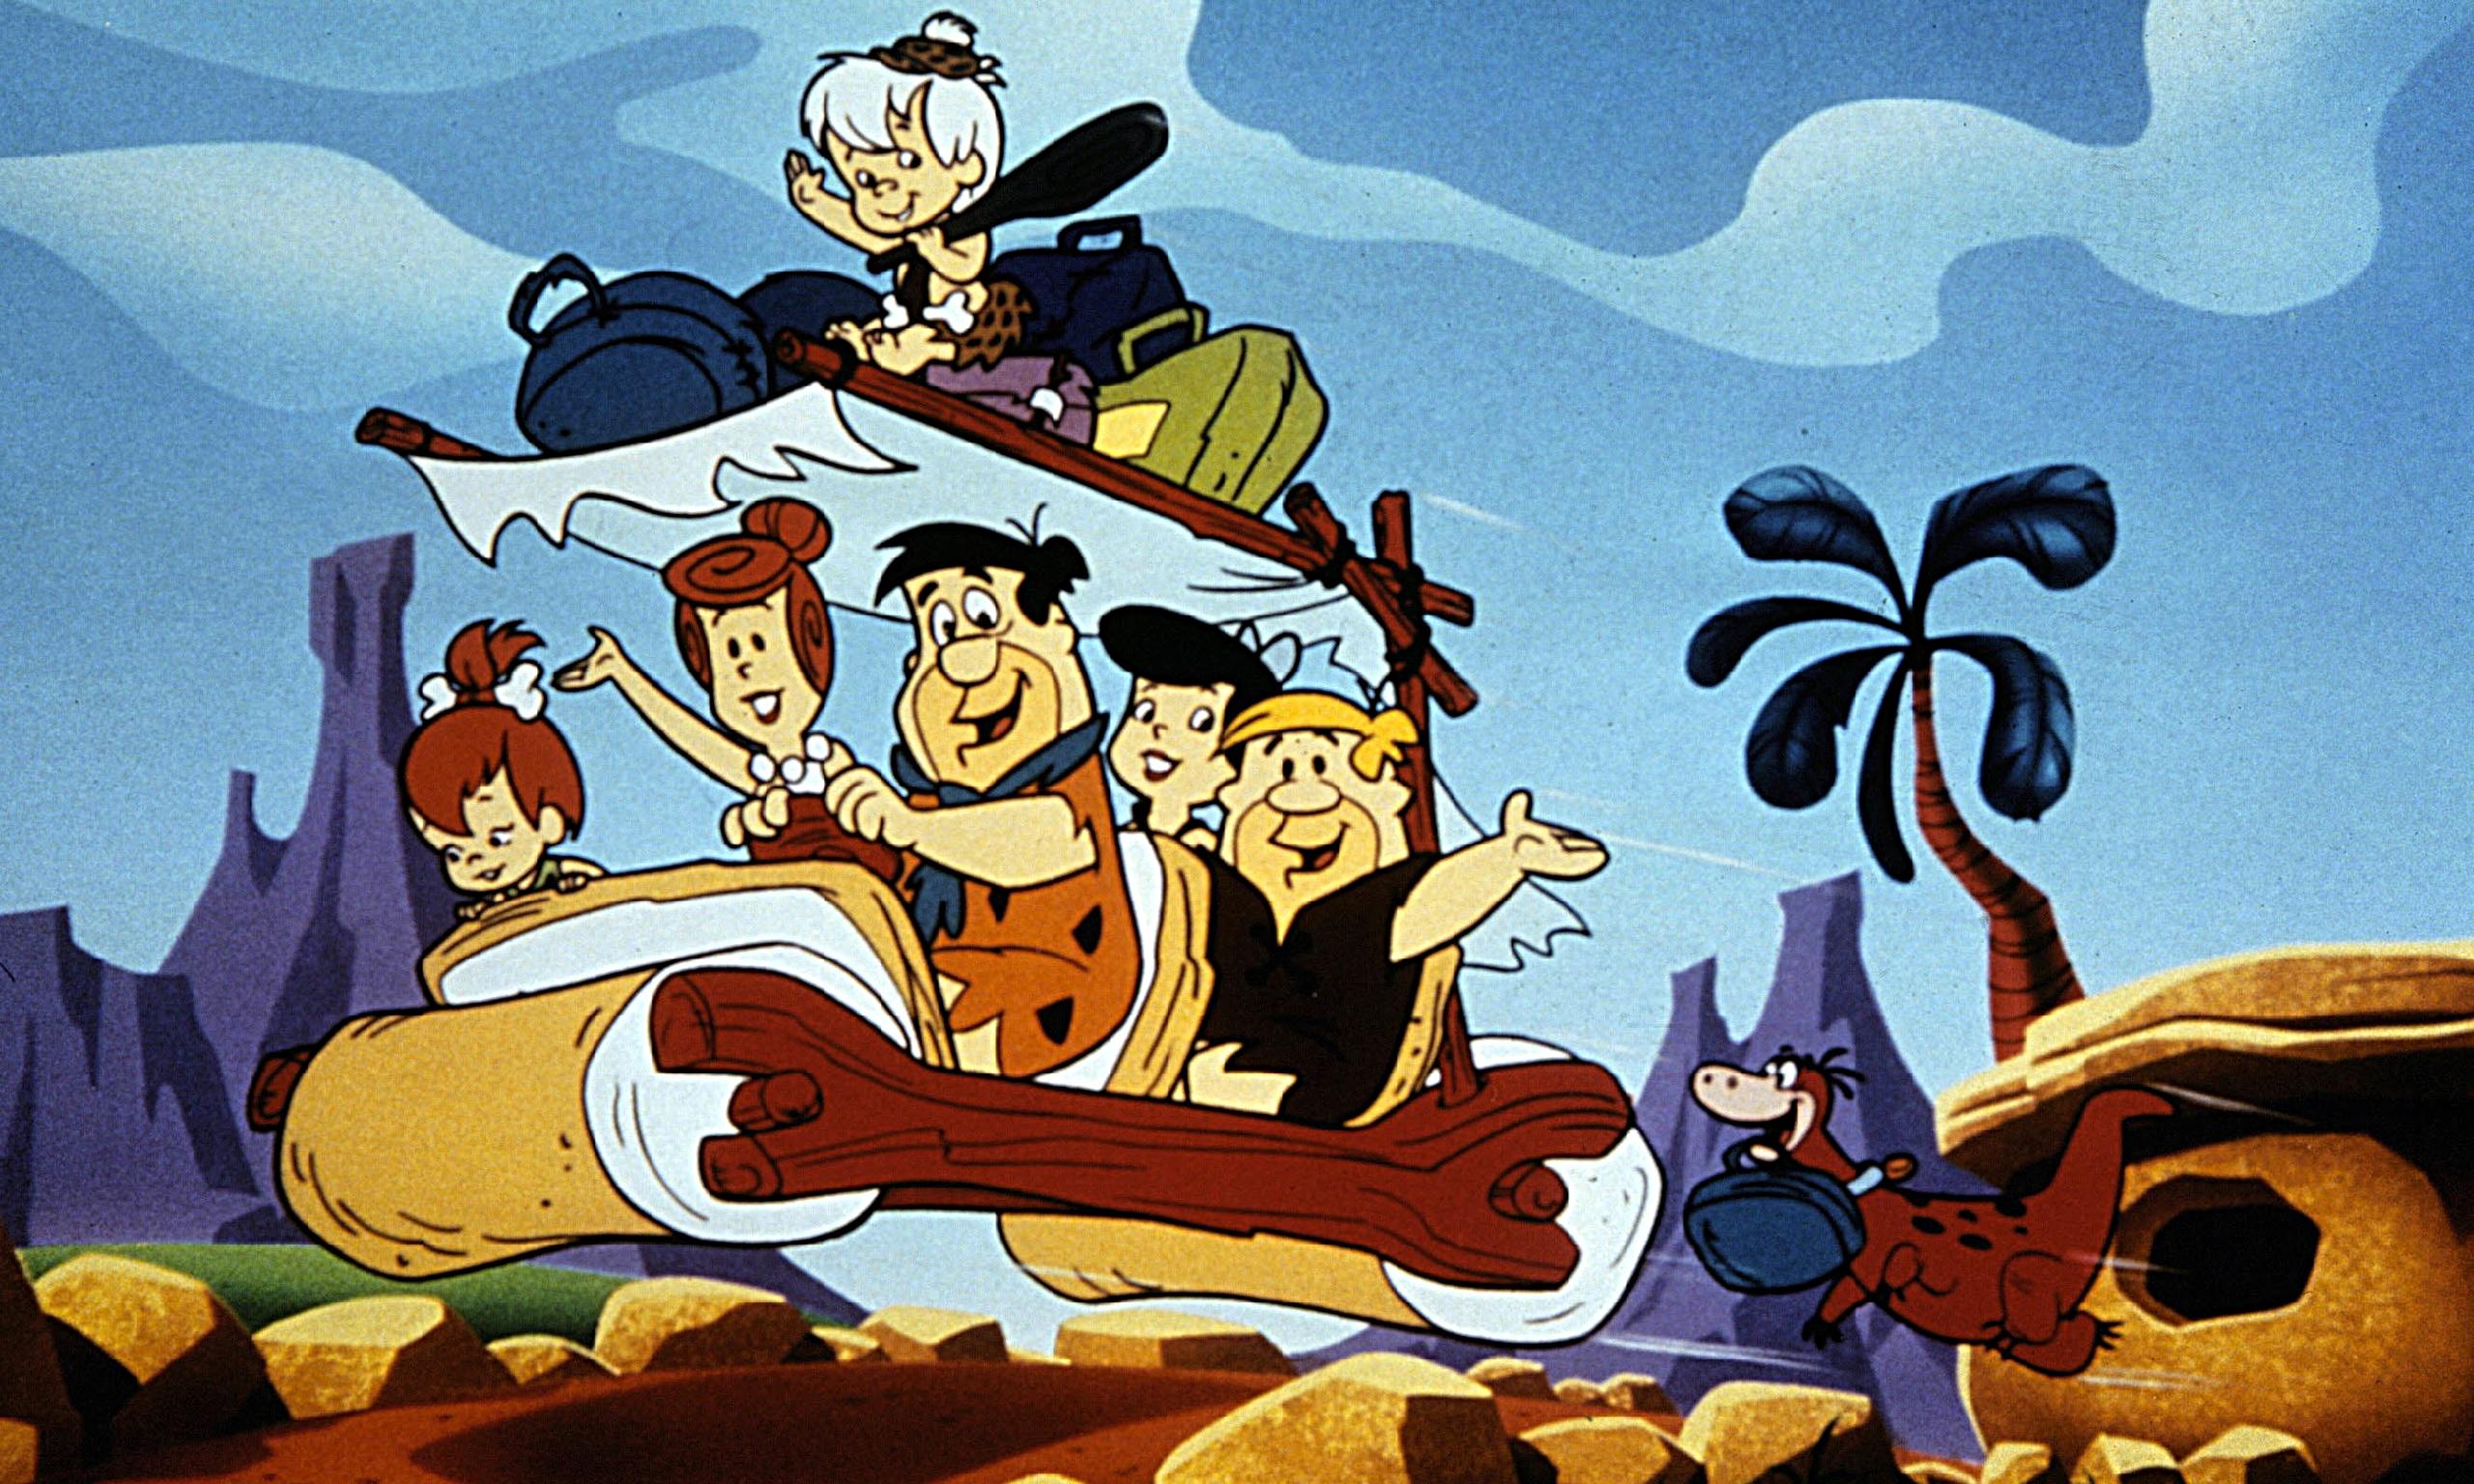 A feature-length The Flintstones animation? Yabba dabba do it! | Film | The Guardian2560 x 1536